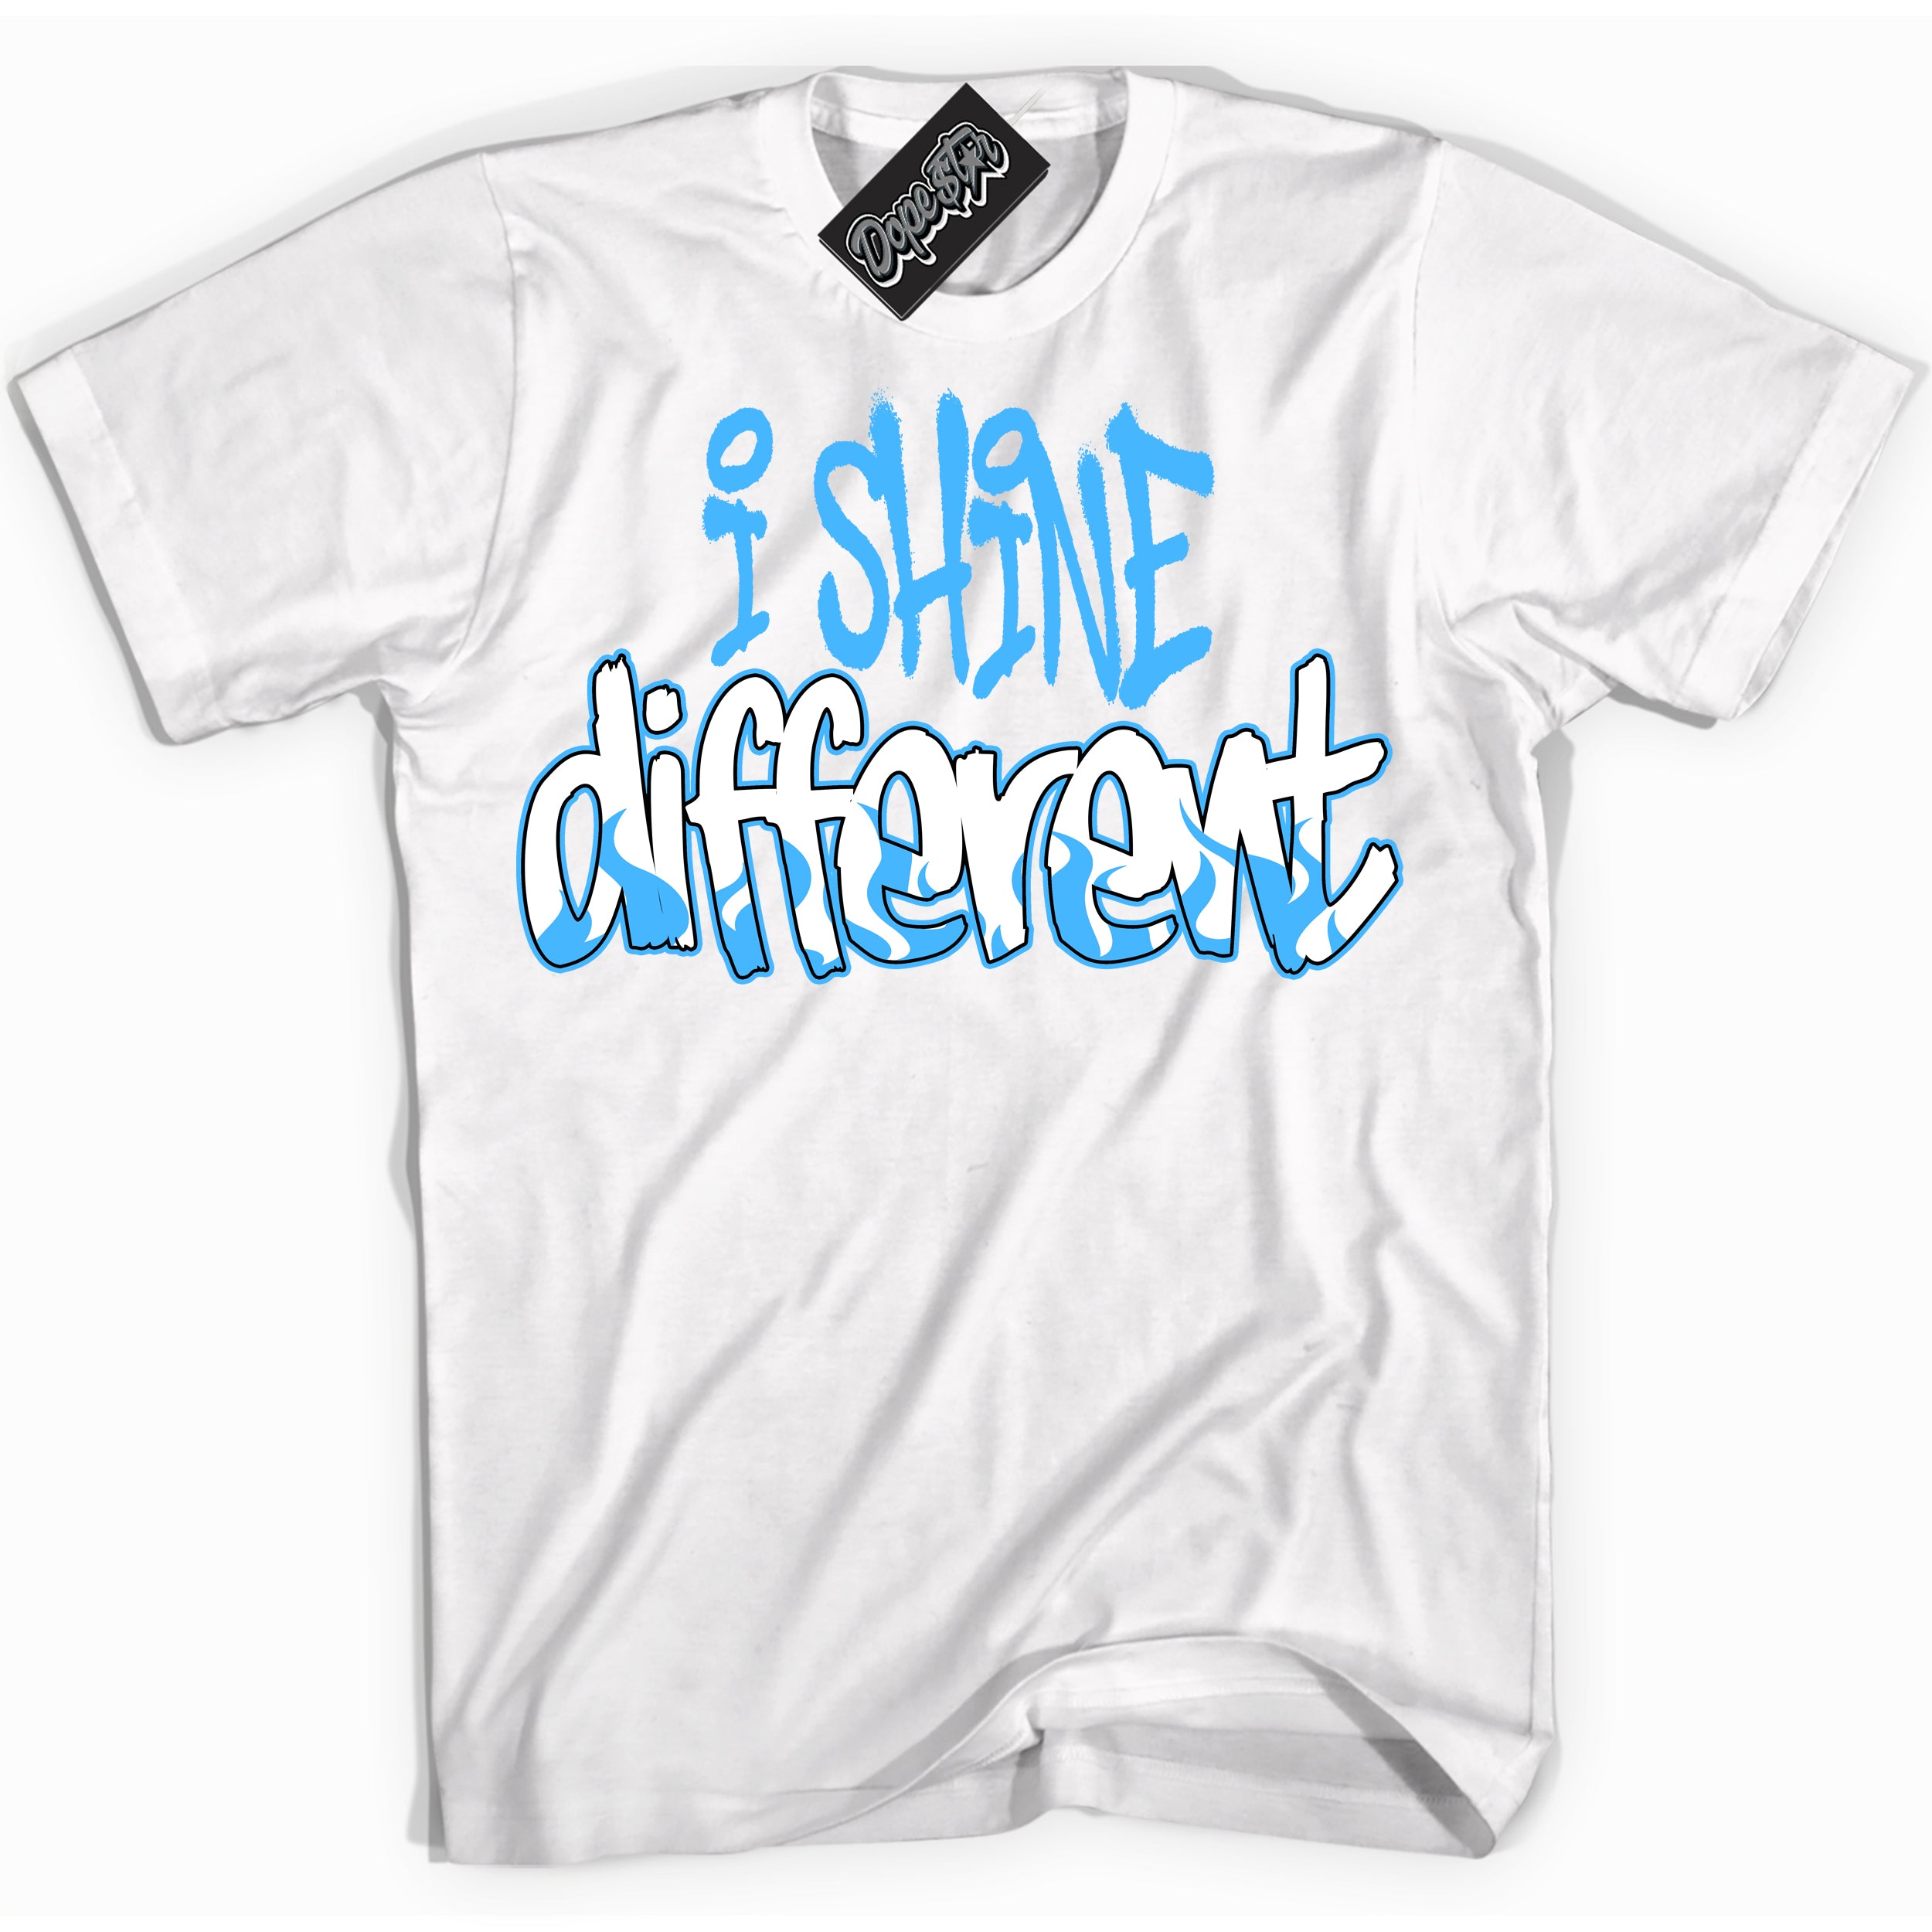 Cool White graphic tee with “ I Shine Different ” design, that perfectly matches Powder Blue 9s sneakers 